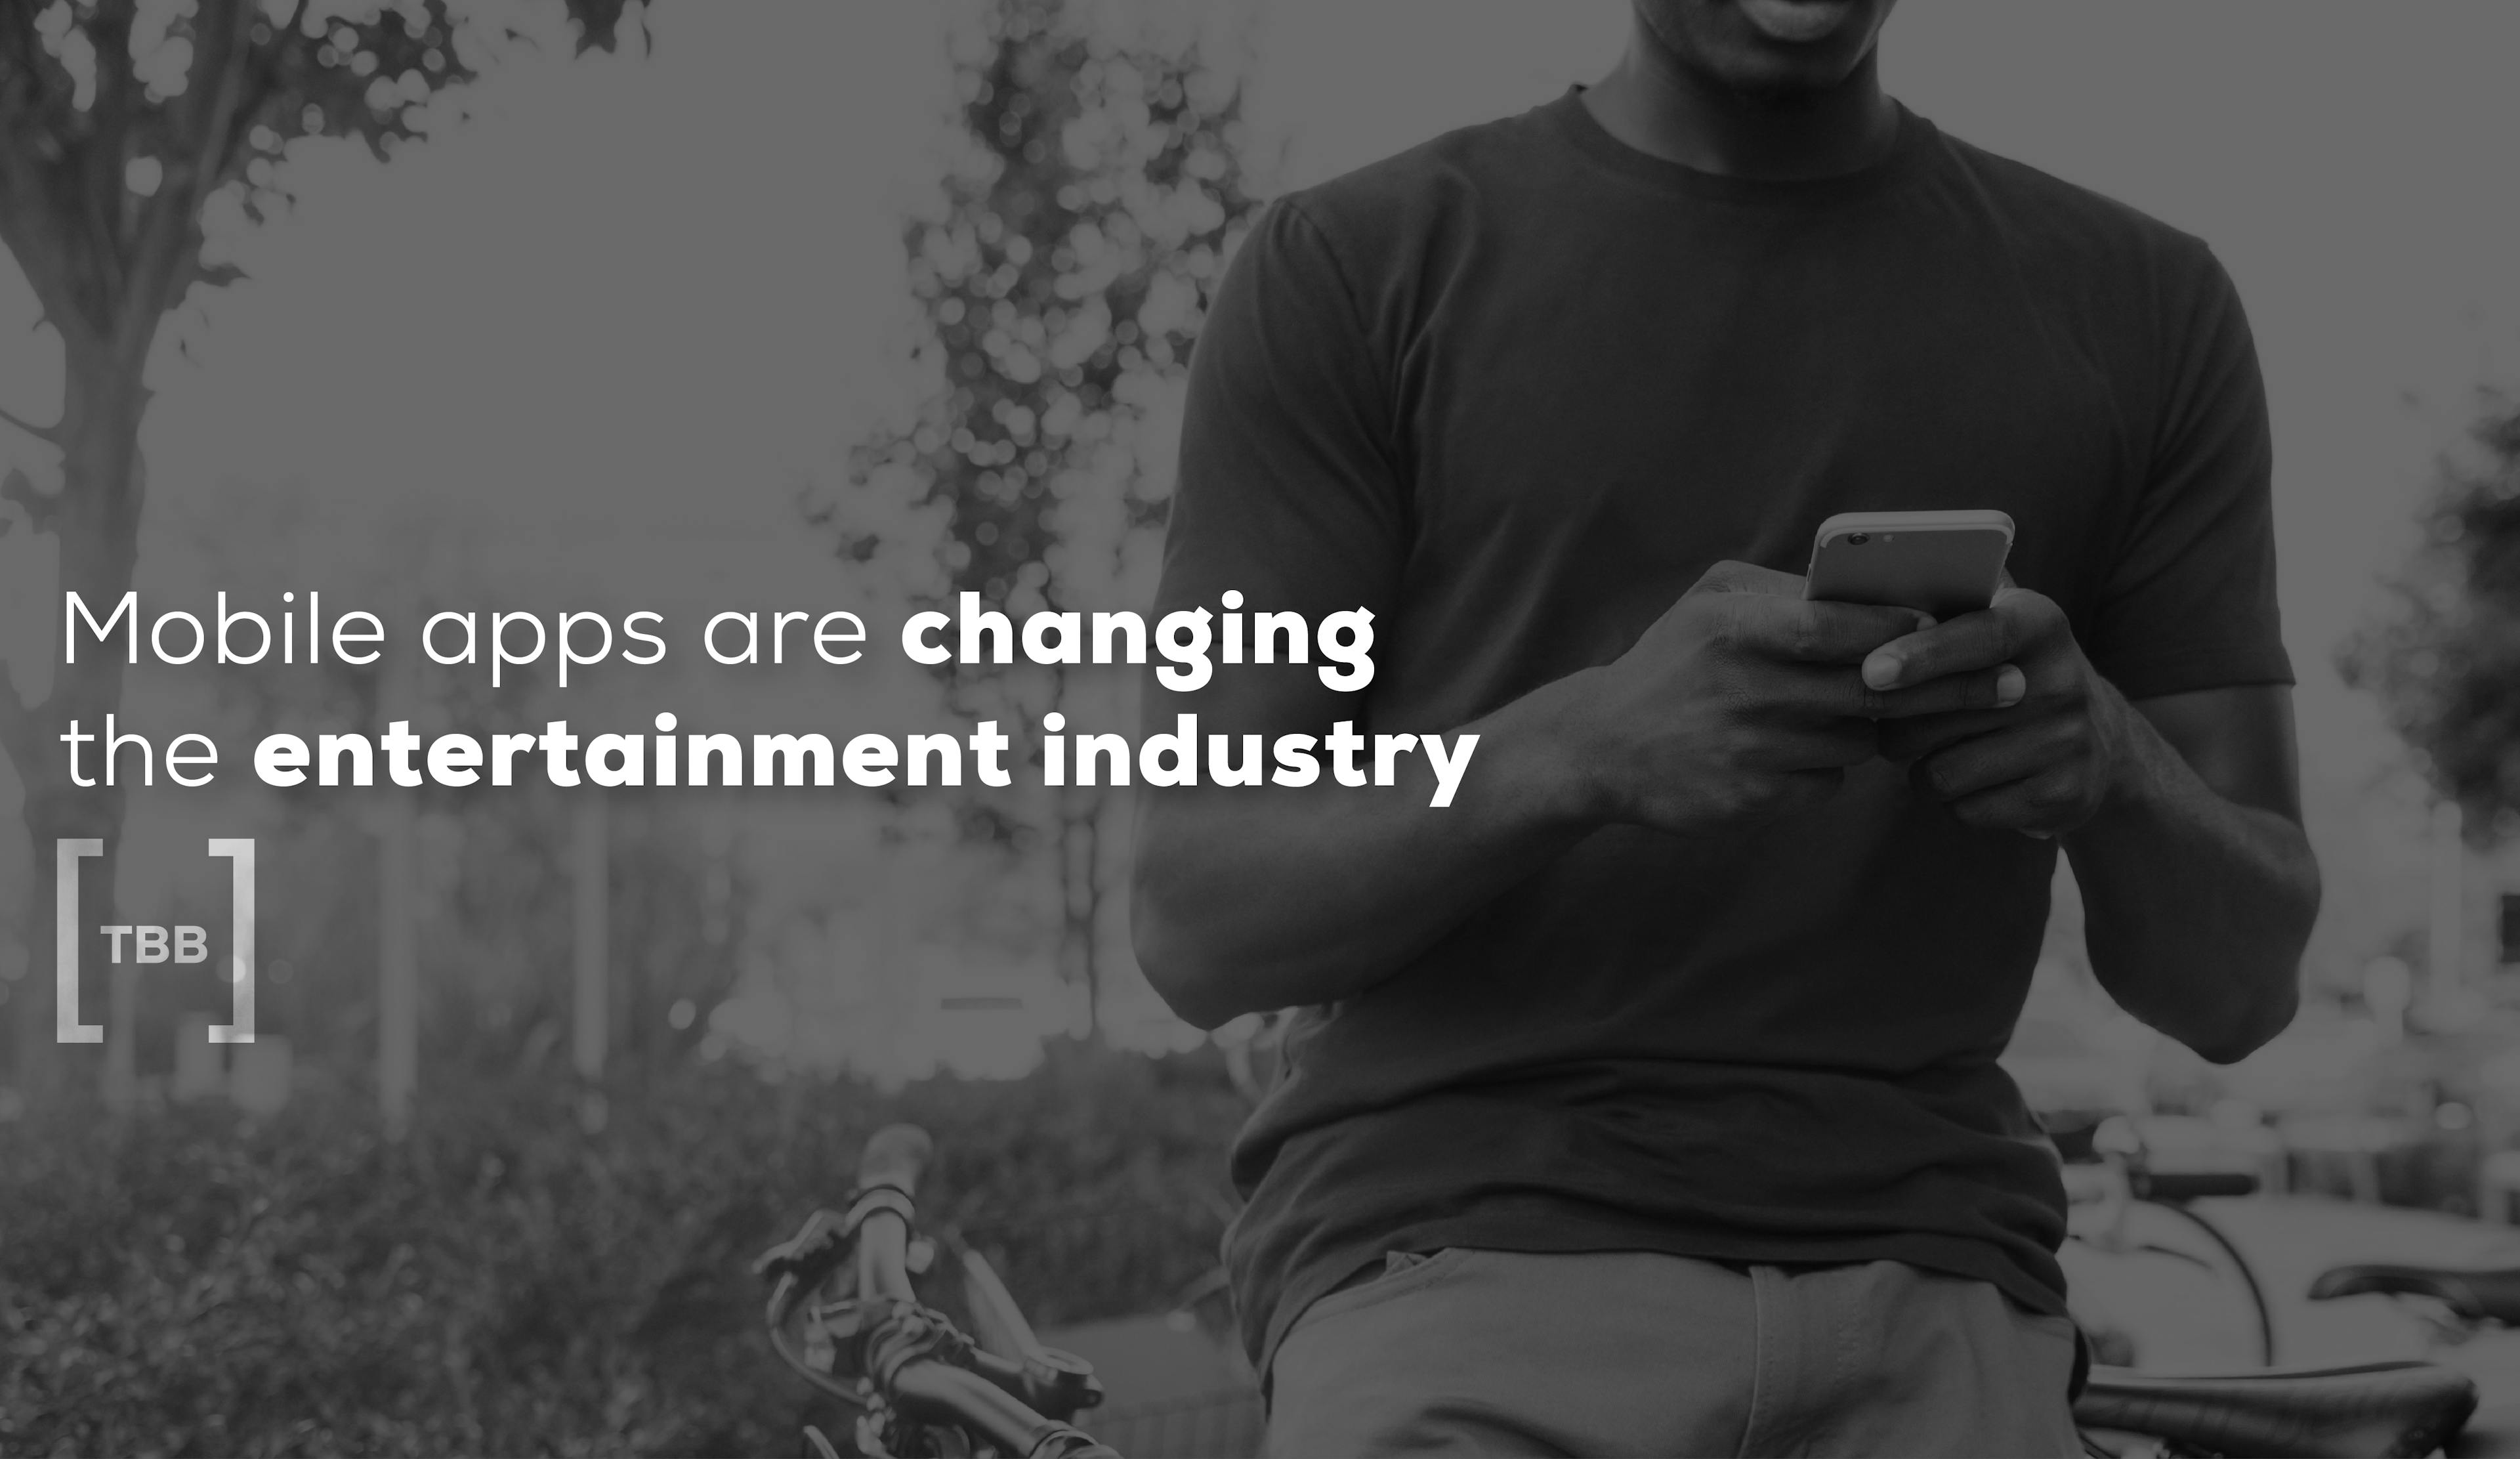 Mobile apps are changing the entertainment industry.